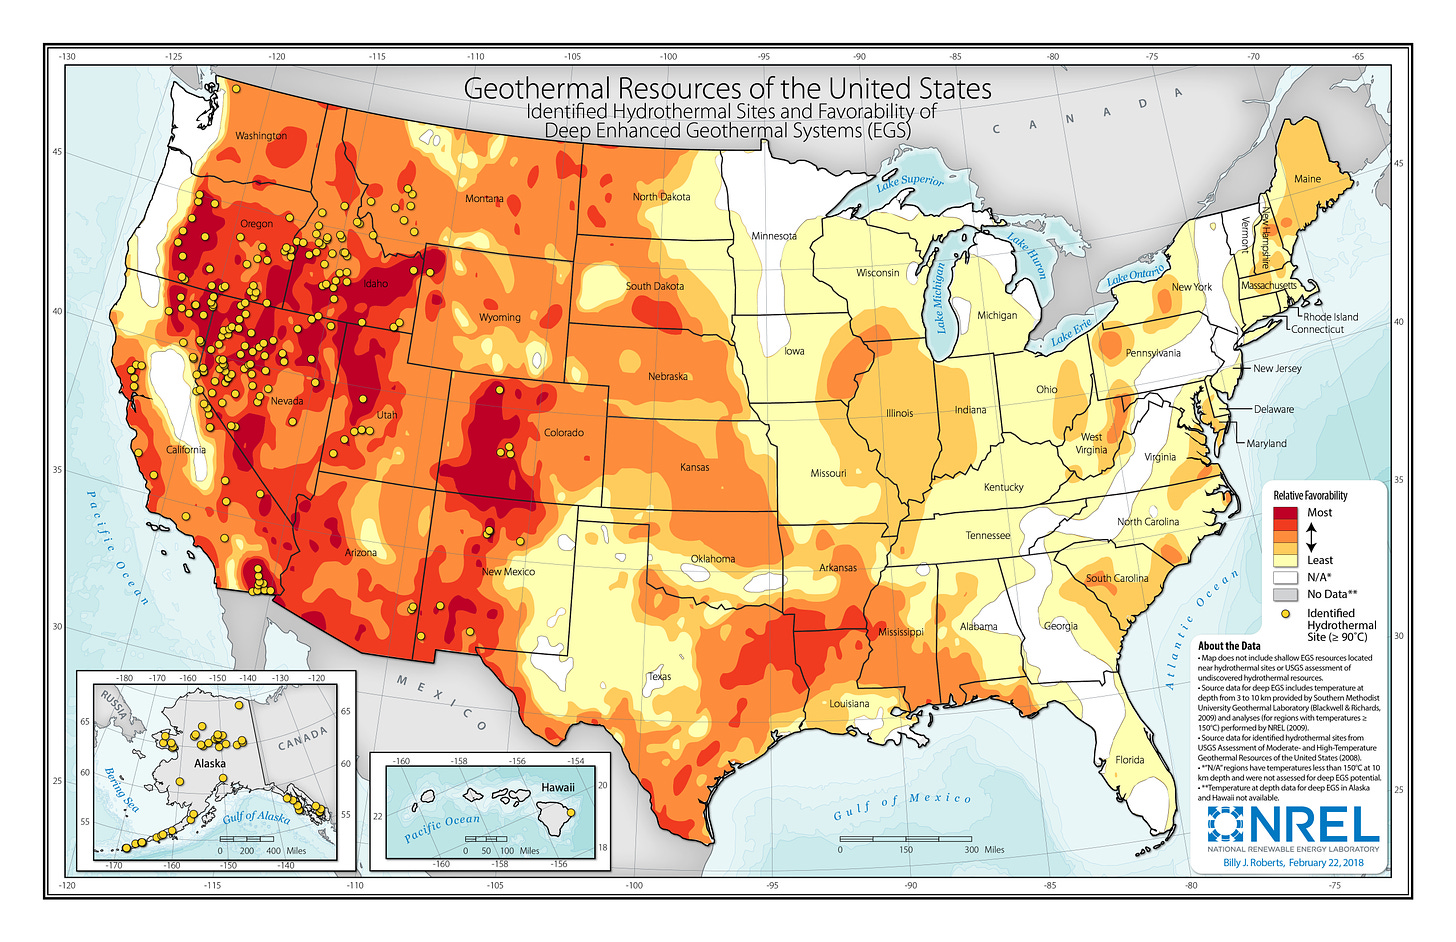 Map of geothermal resources in the US